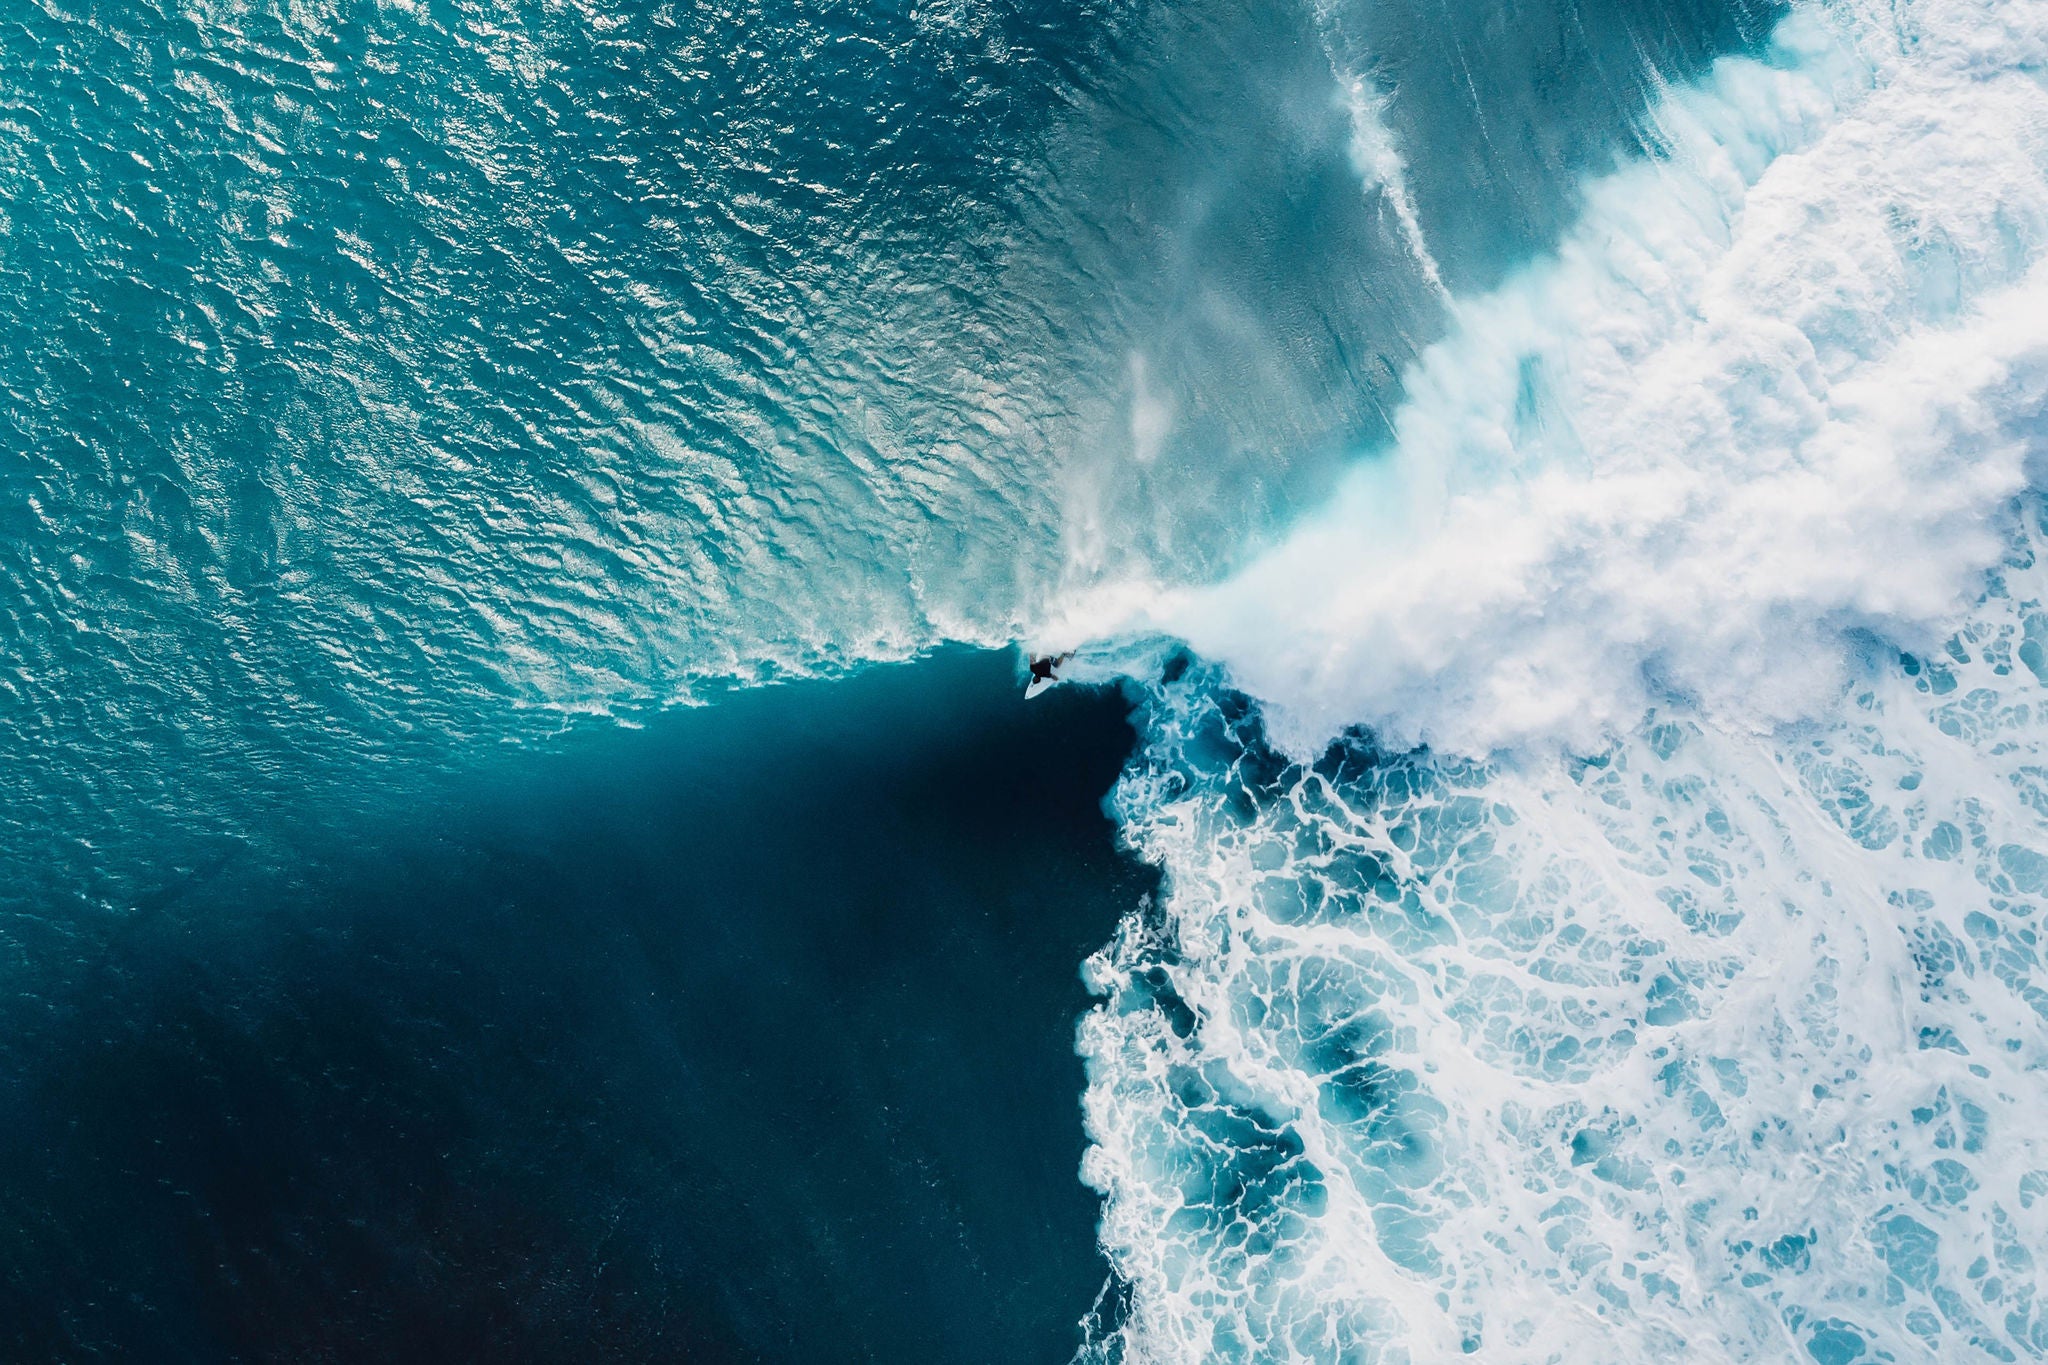 Aerial view with surfers and wave in crystal blue ocean.